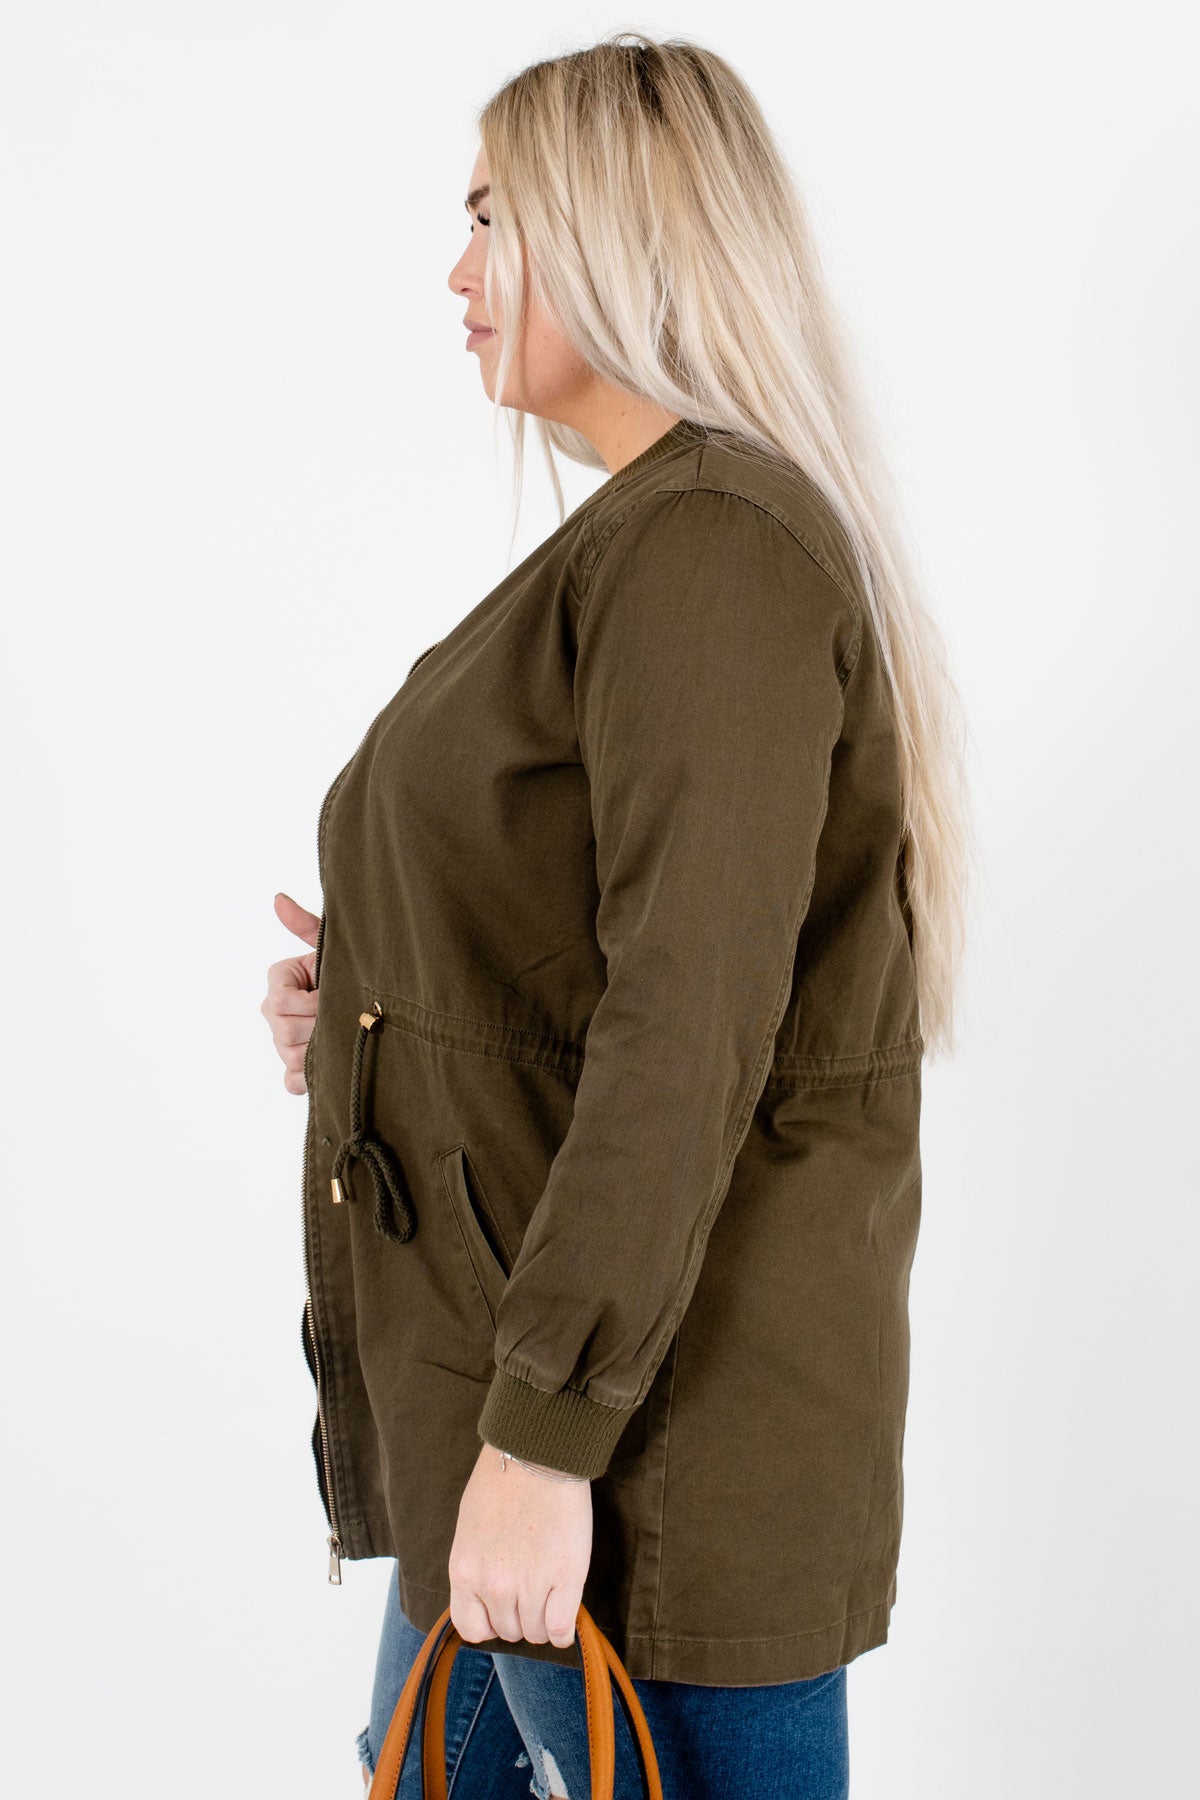 Women's Olive Green Layering Boutique Jackets